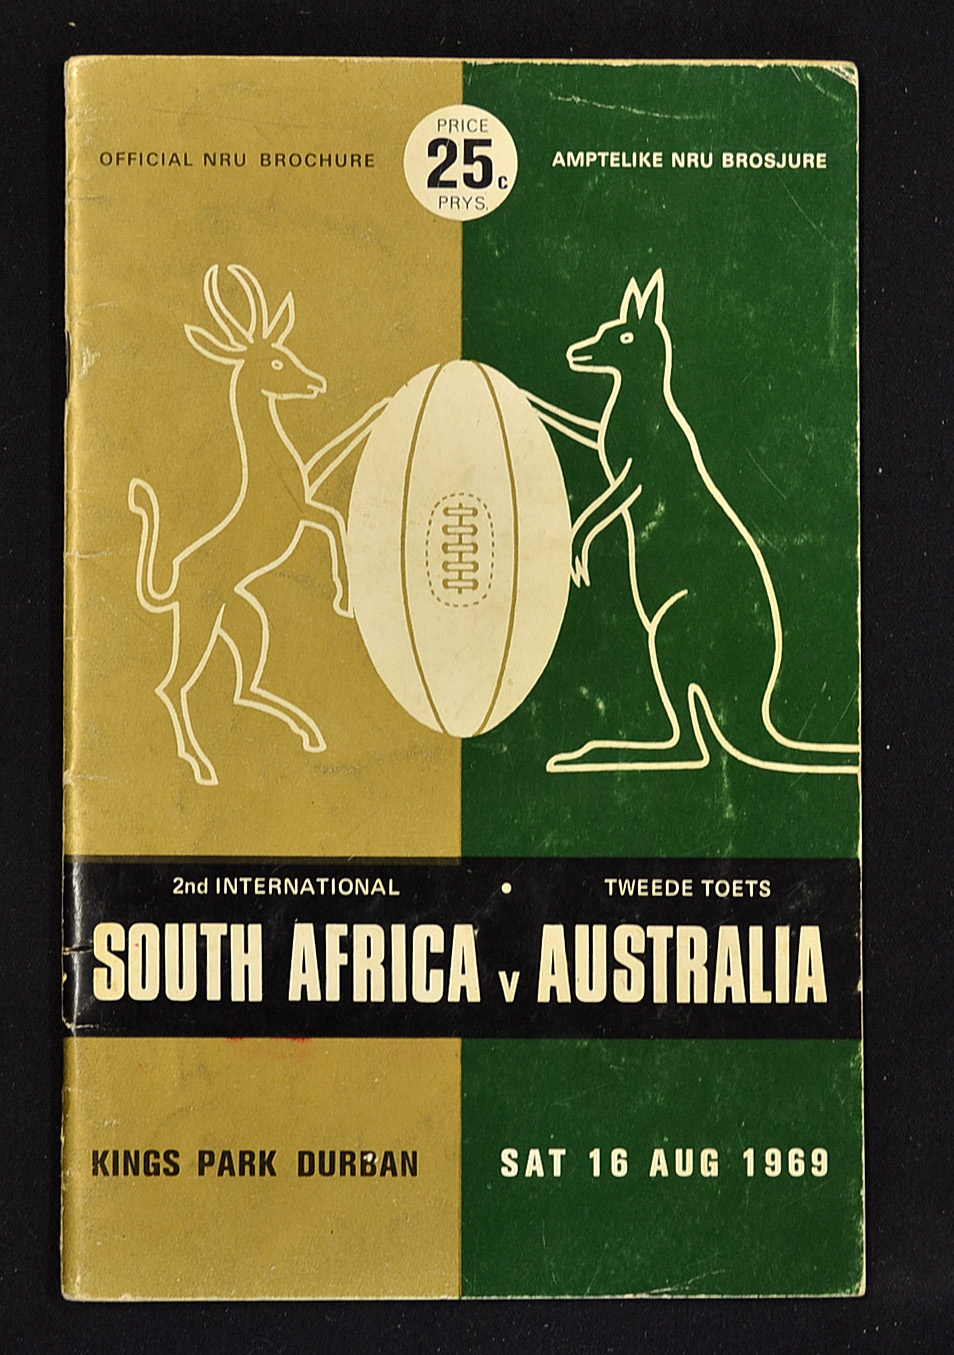 1969 South Africa v Australia rugby programme - 2nd test match played at Kings Park Durban - some